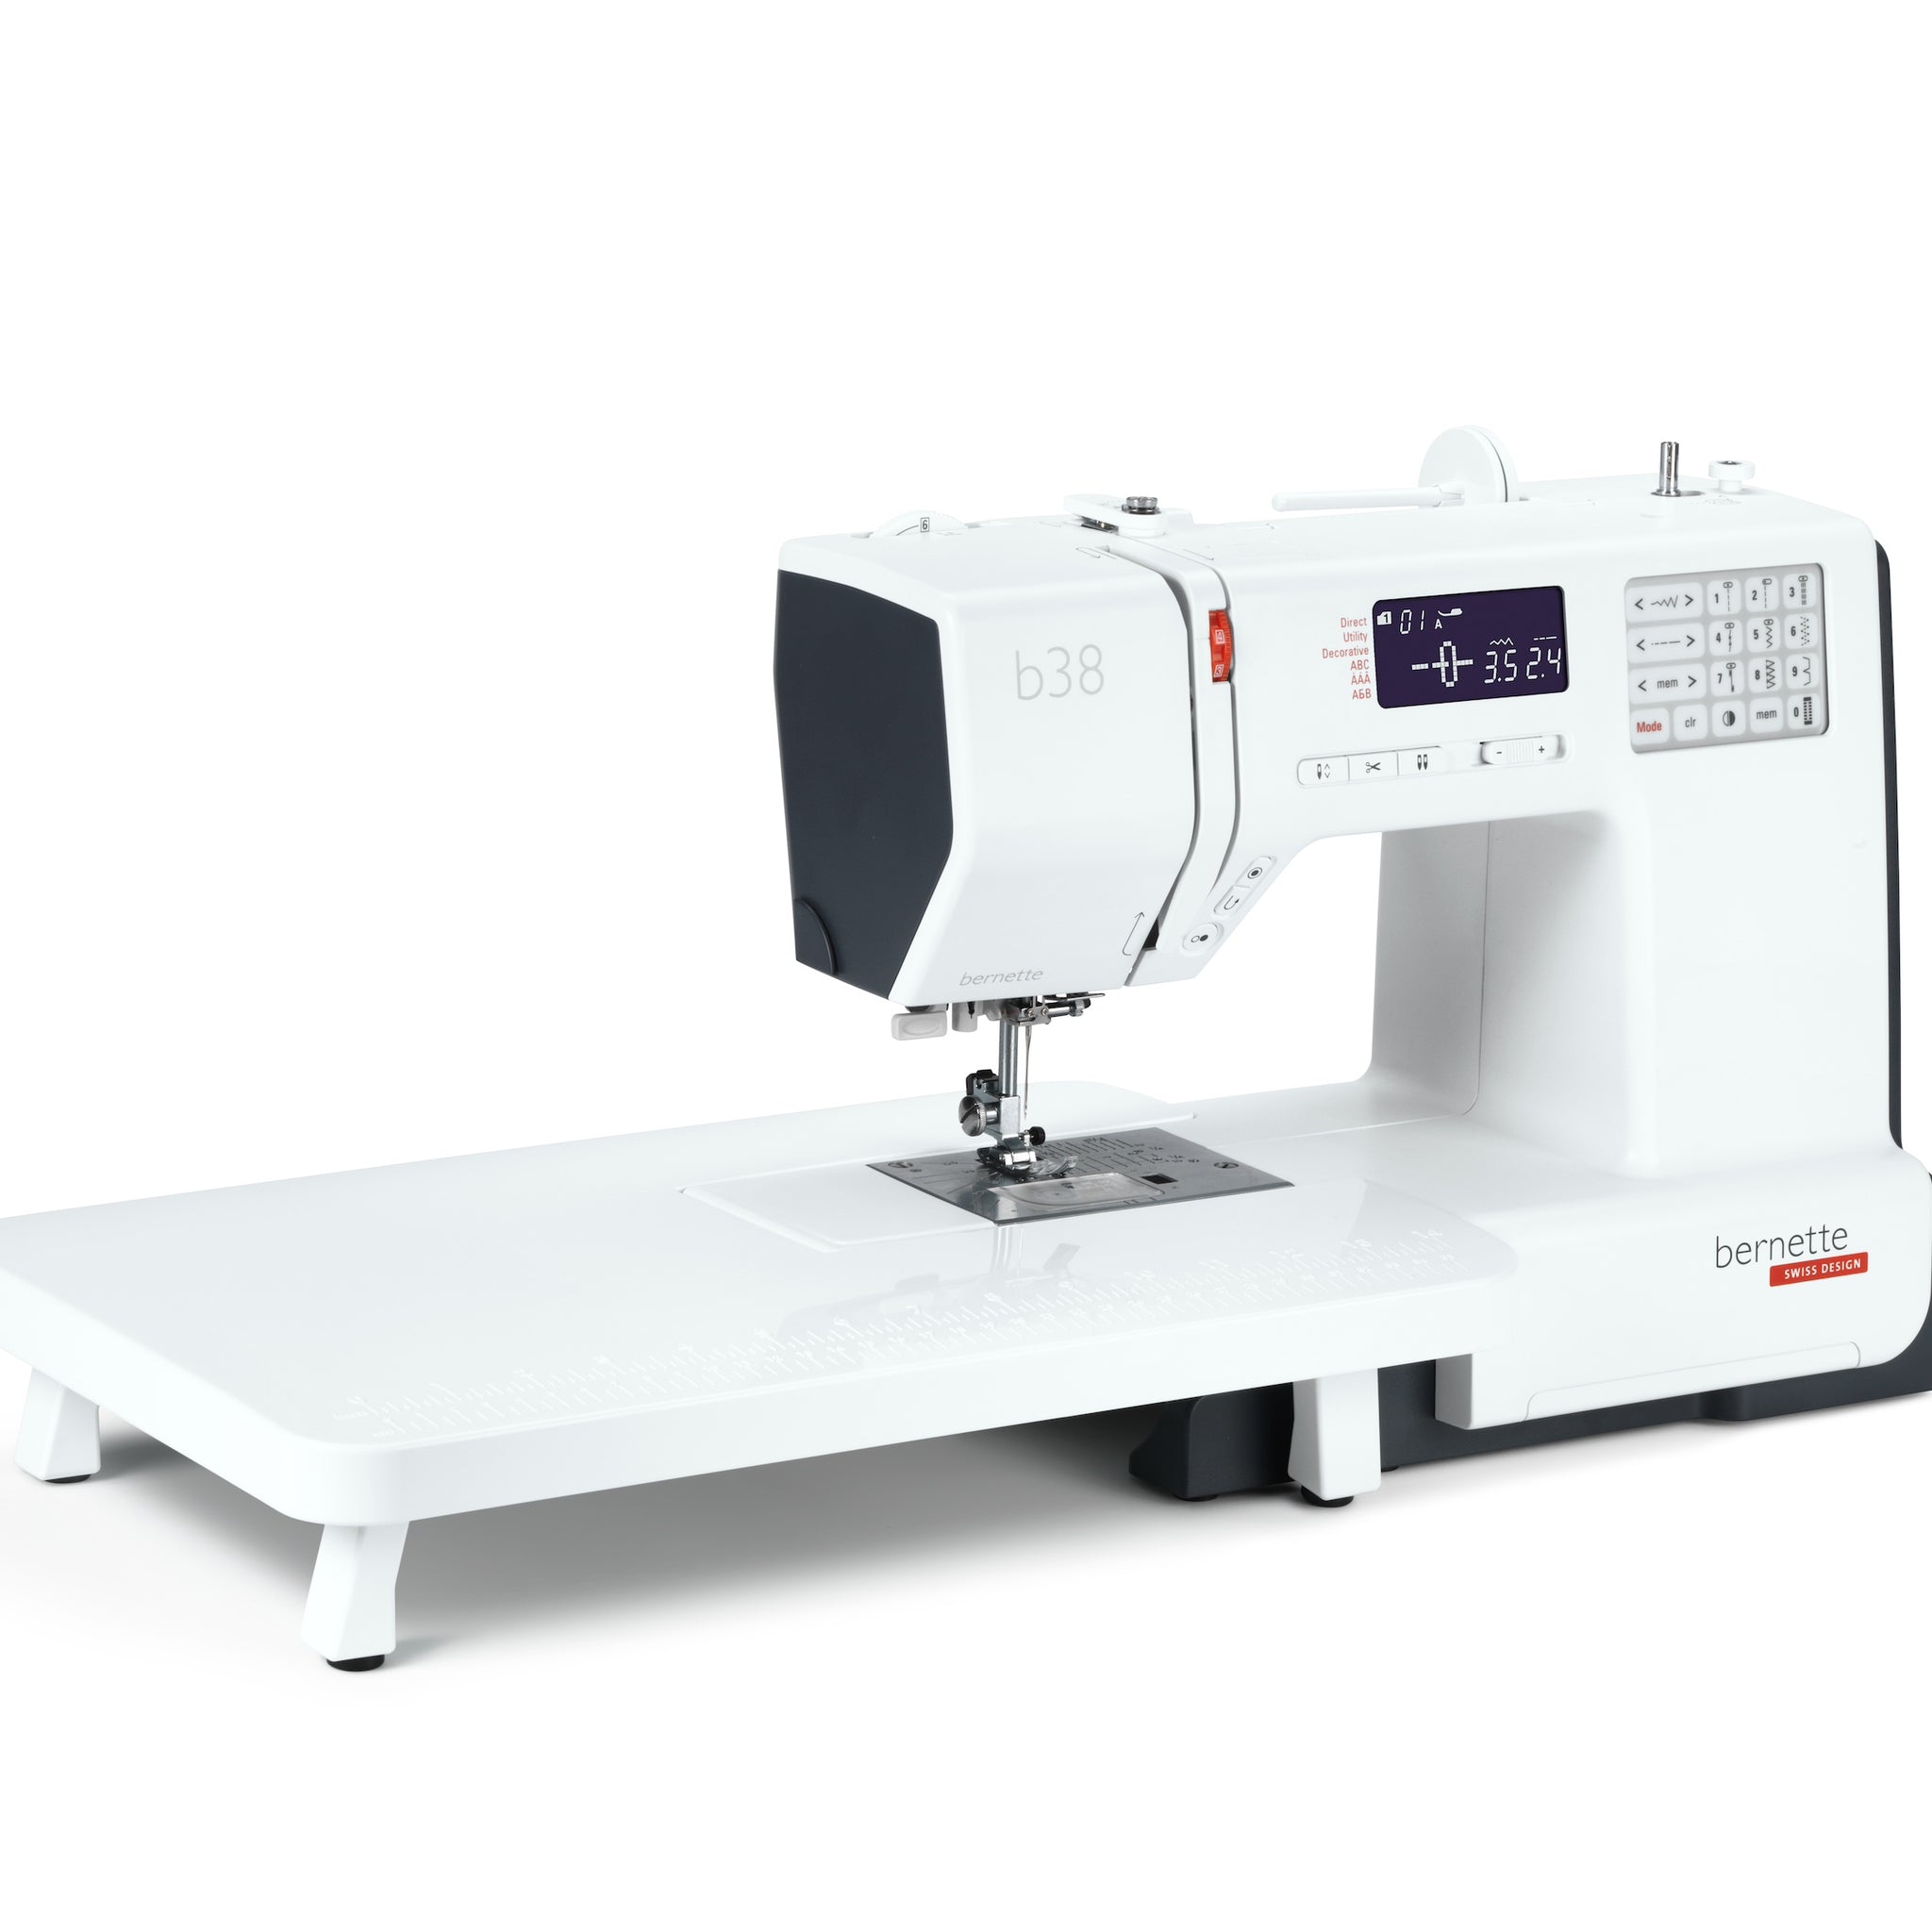 Bernette Computerized Sewing Machine b38 - Affordable Sewing - Top of the 30 Series